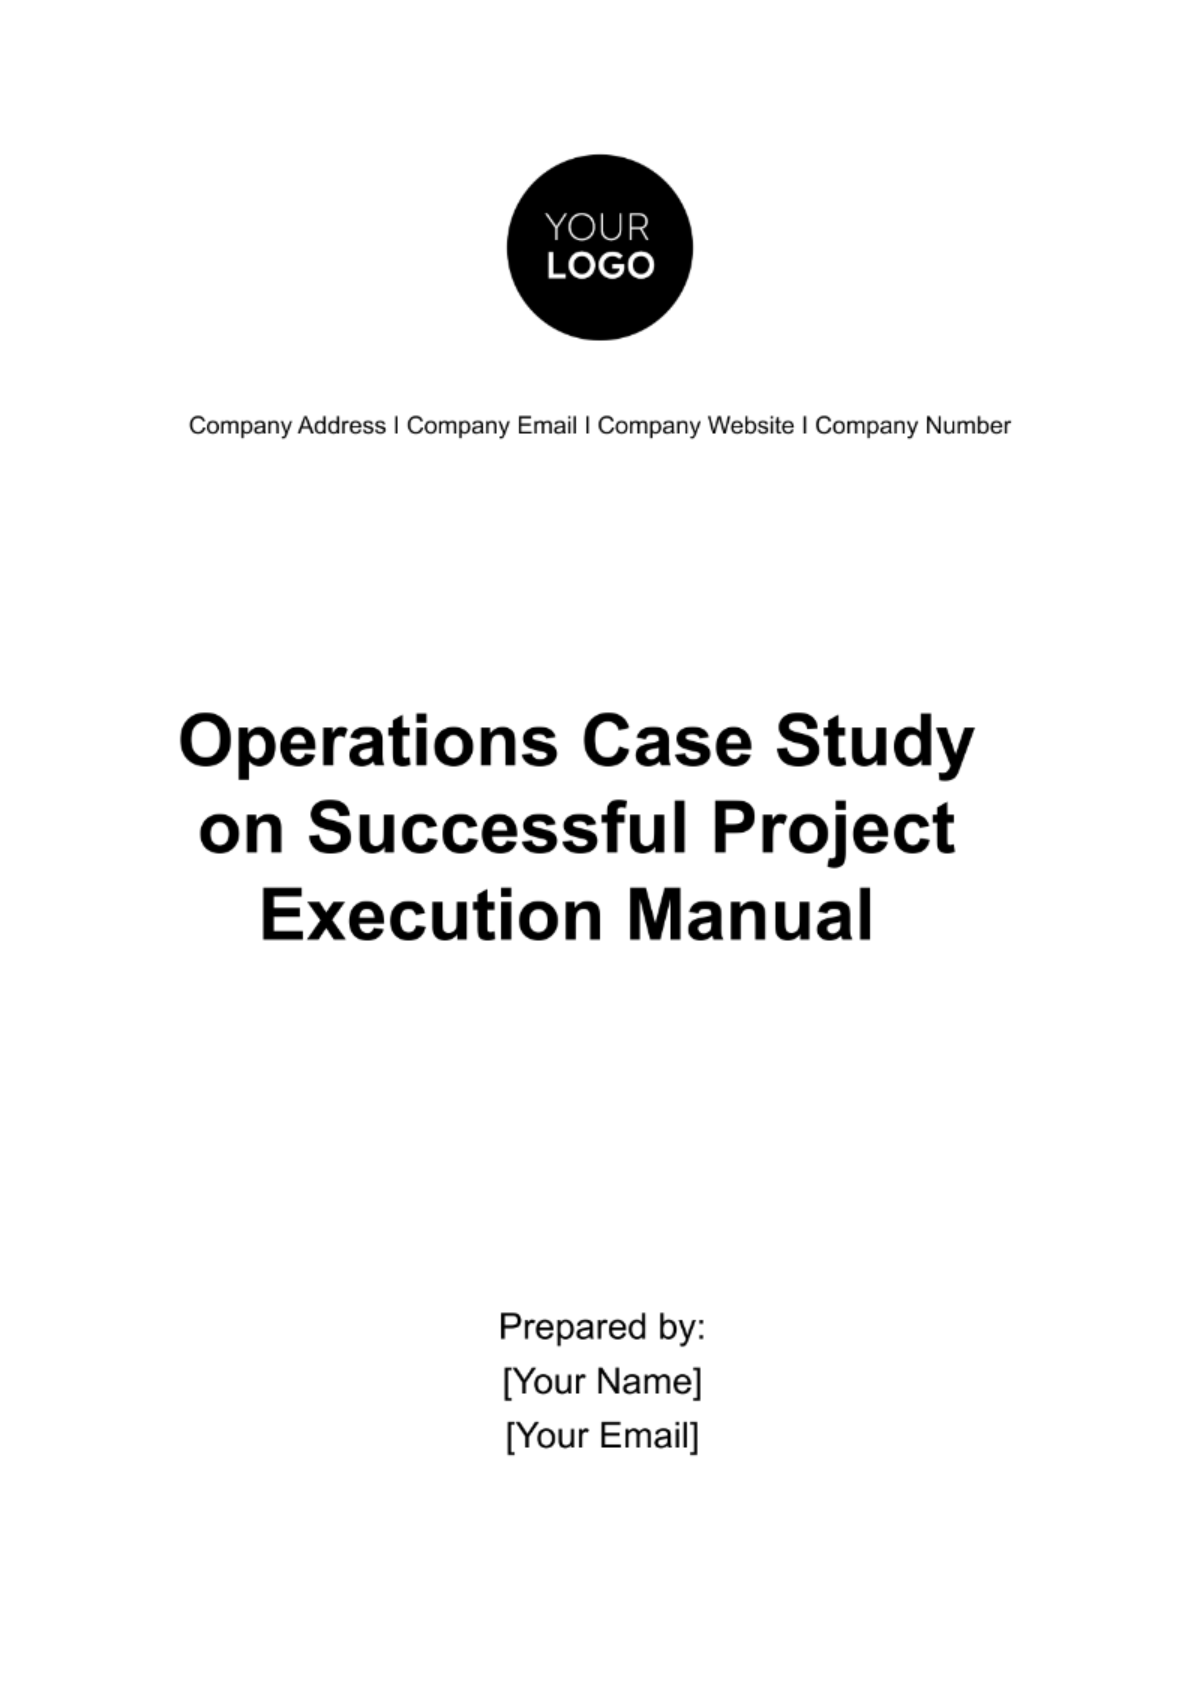 Operations Case Study on Successful Project Execution Manual Template